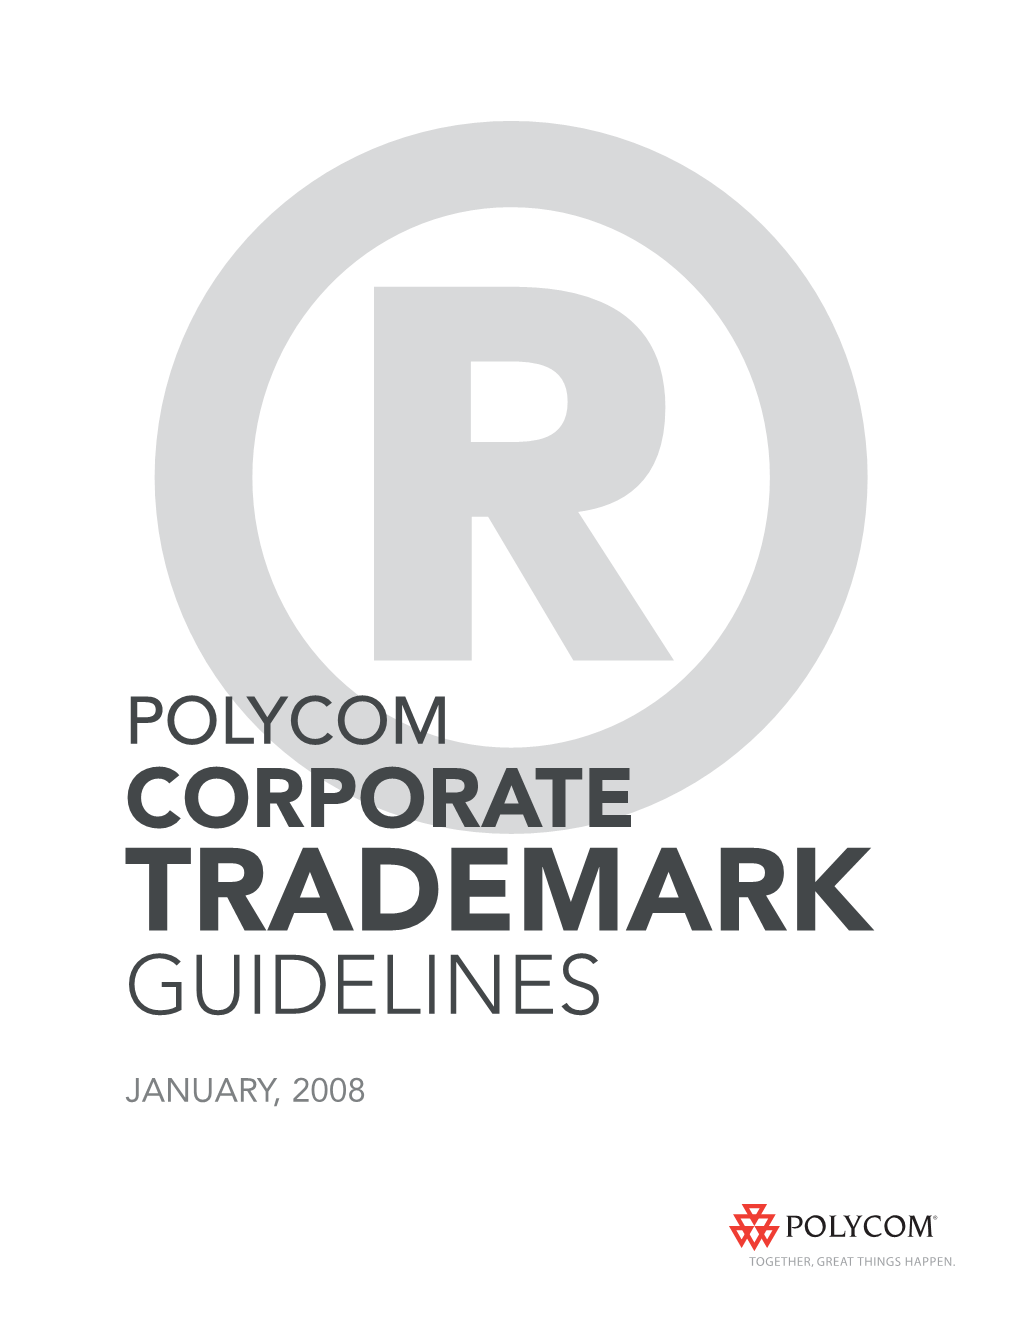 Polycom Corporate Trademark Guidelines®